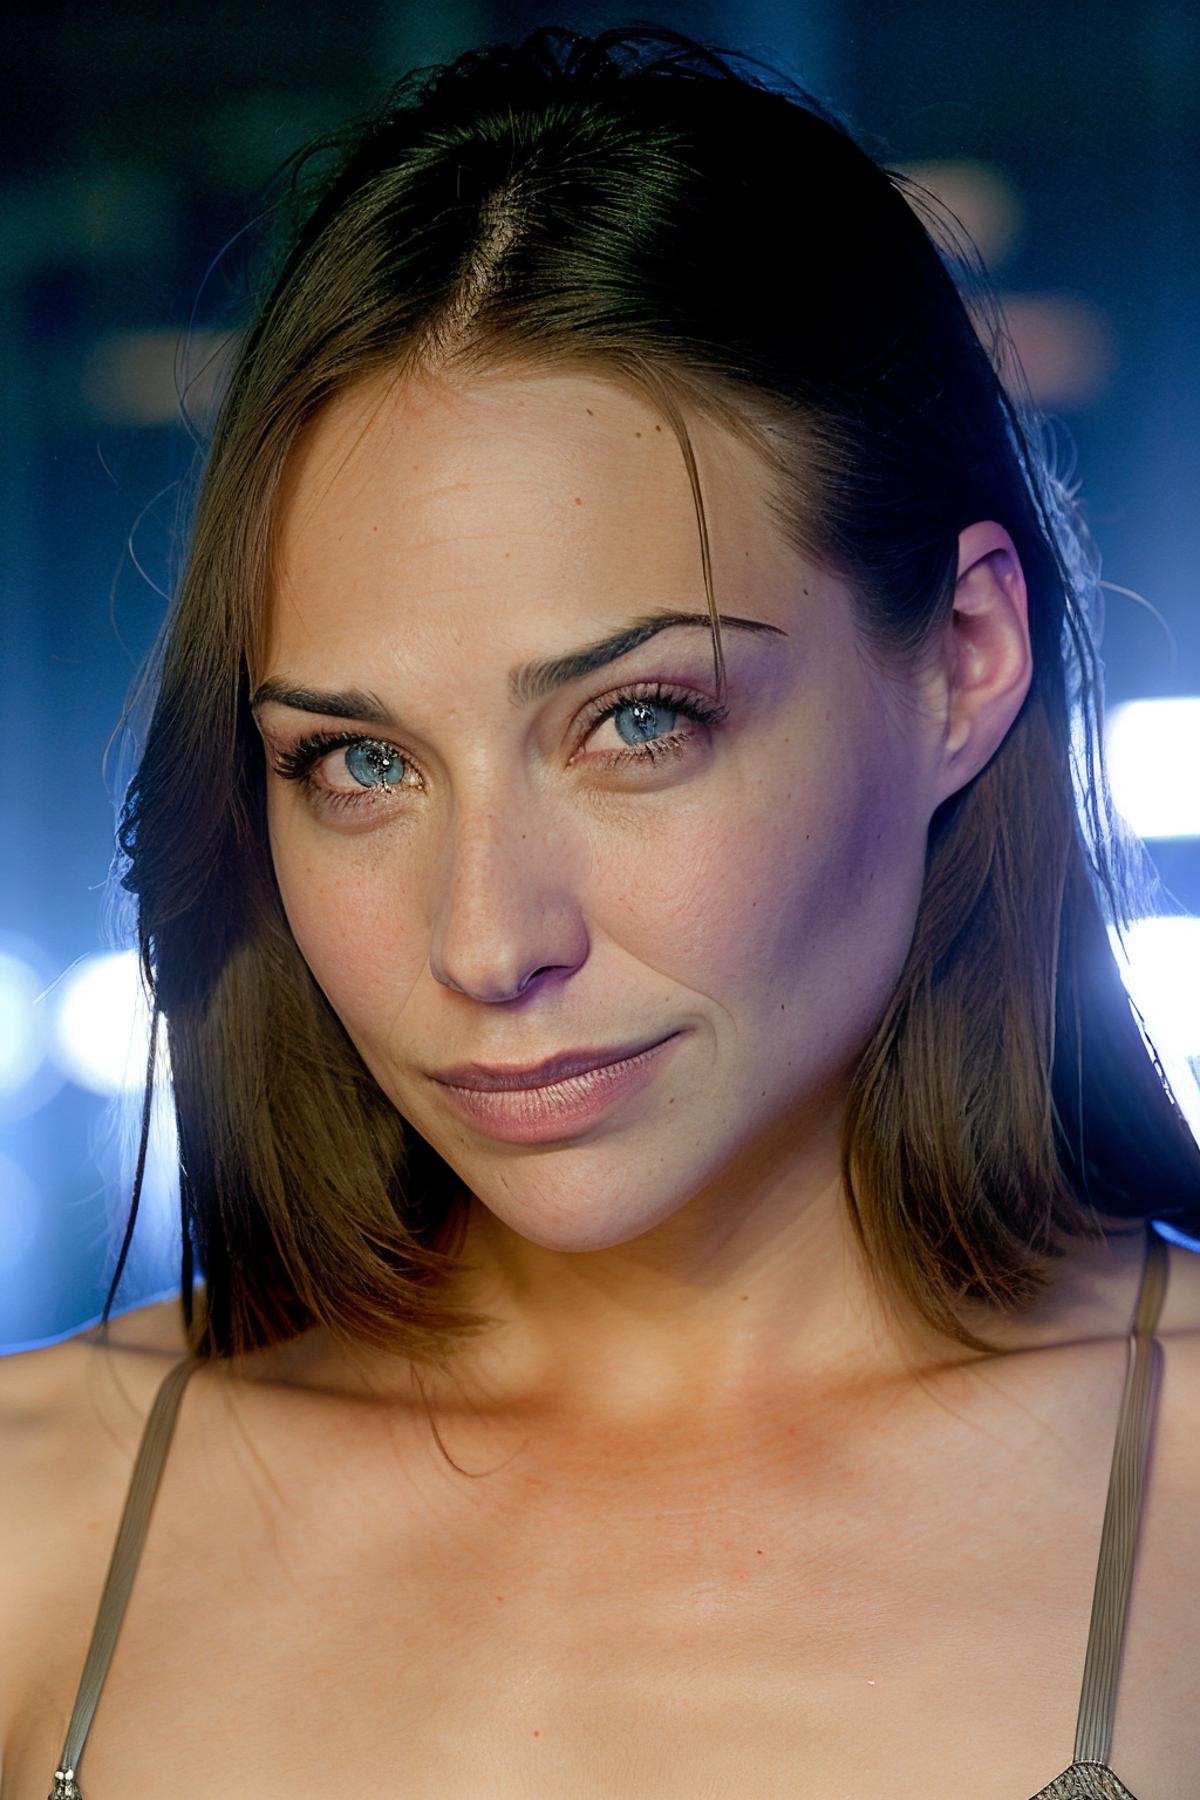 Claire Forlani image by astragartist